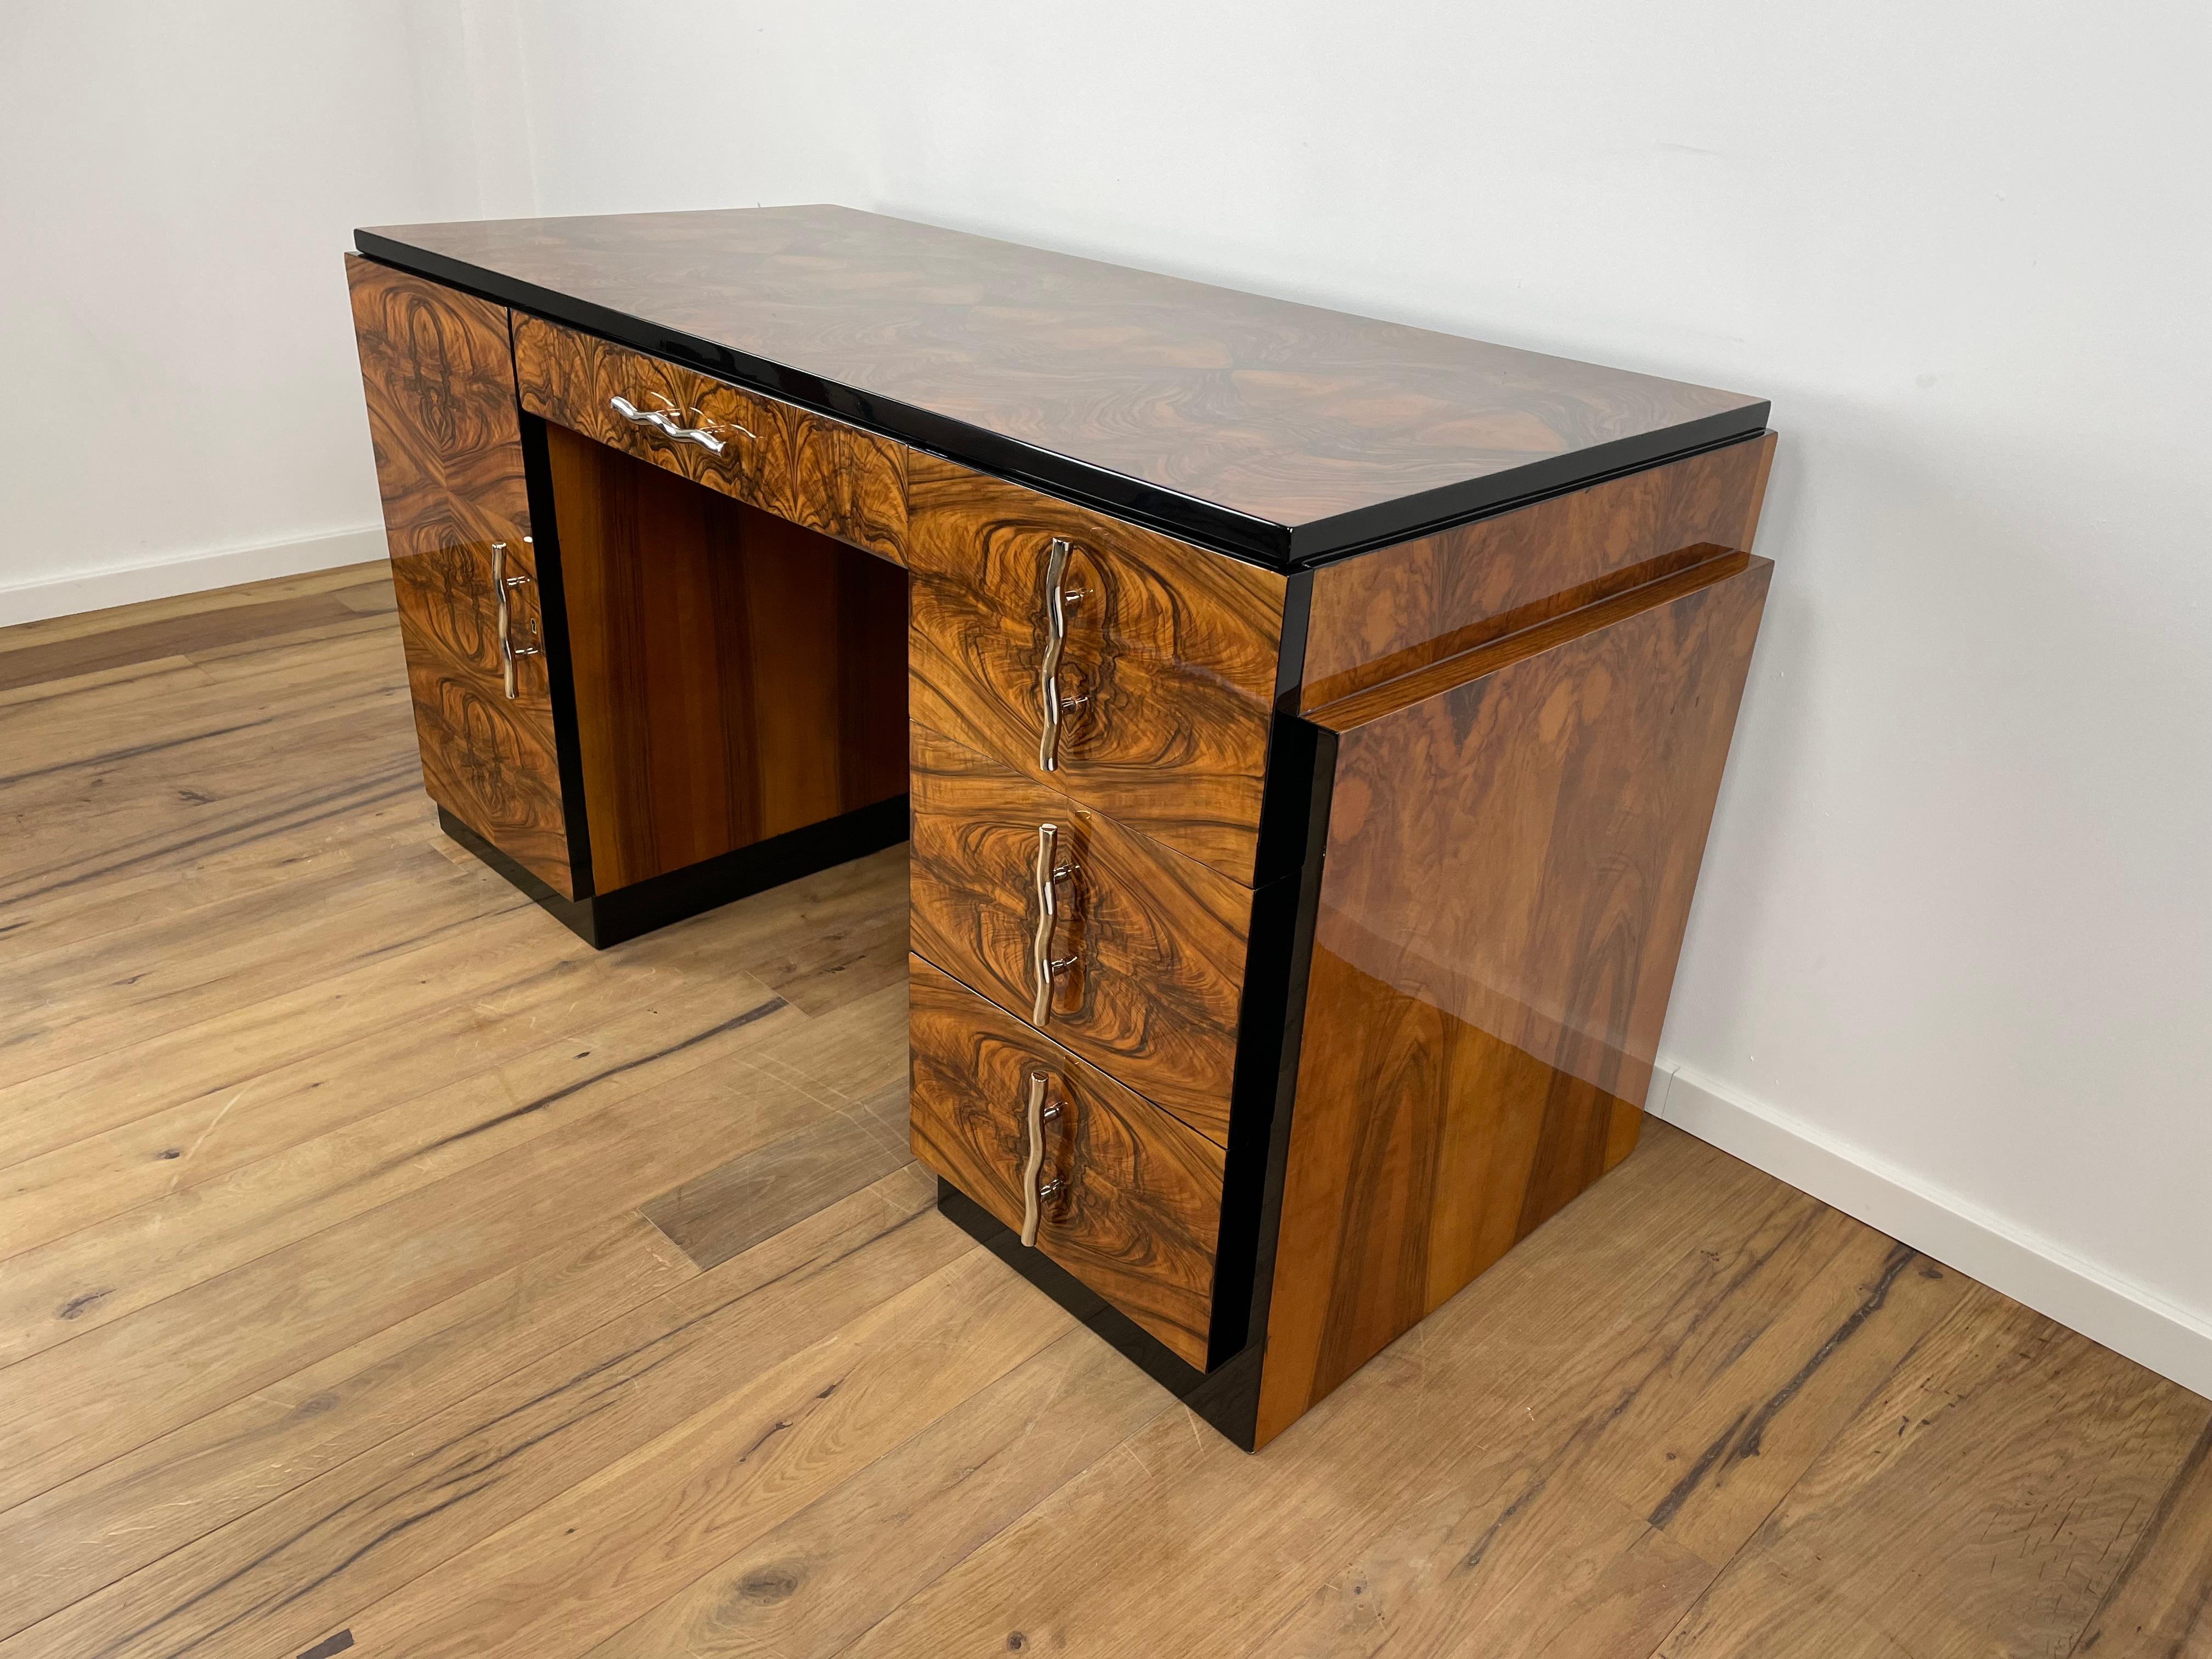 We were able to purchase this wonderful desk in Paris from the Villa Victor Hugo. We were able to buy the entire office, including a desk and library - the library is being offered in another advert from us, but it has not yet been restored. The